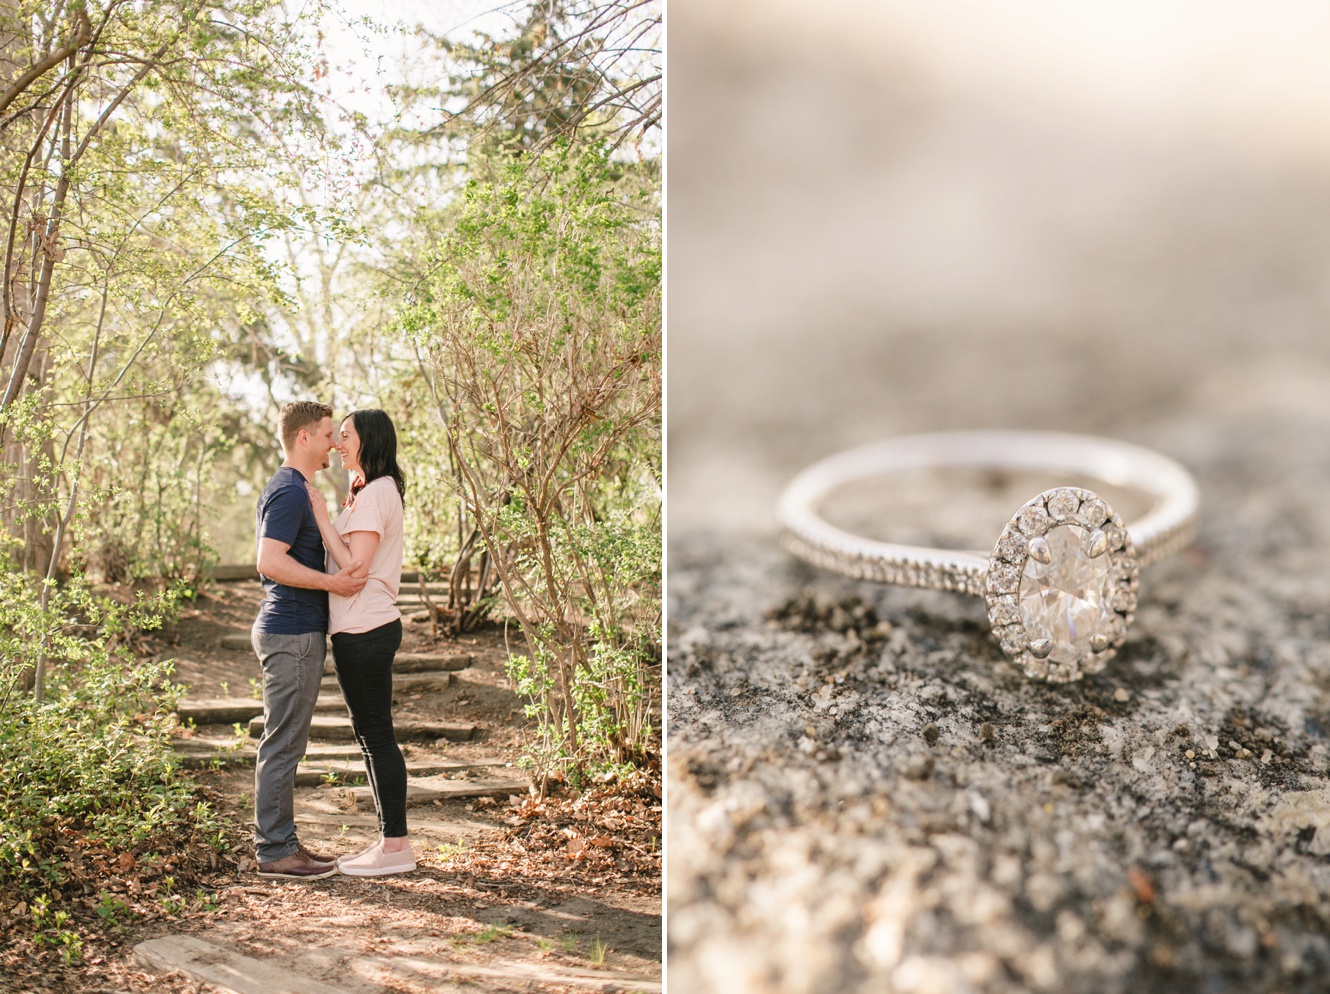 Oval engagement ring photo